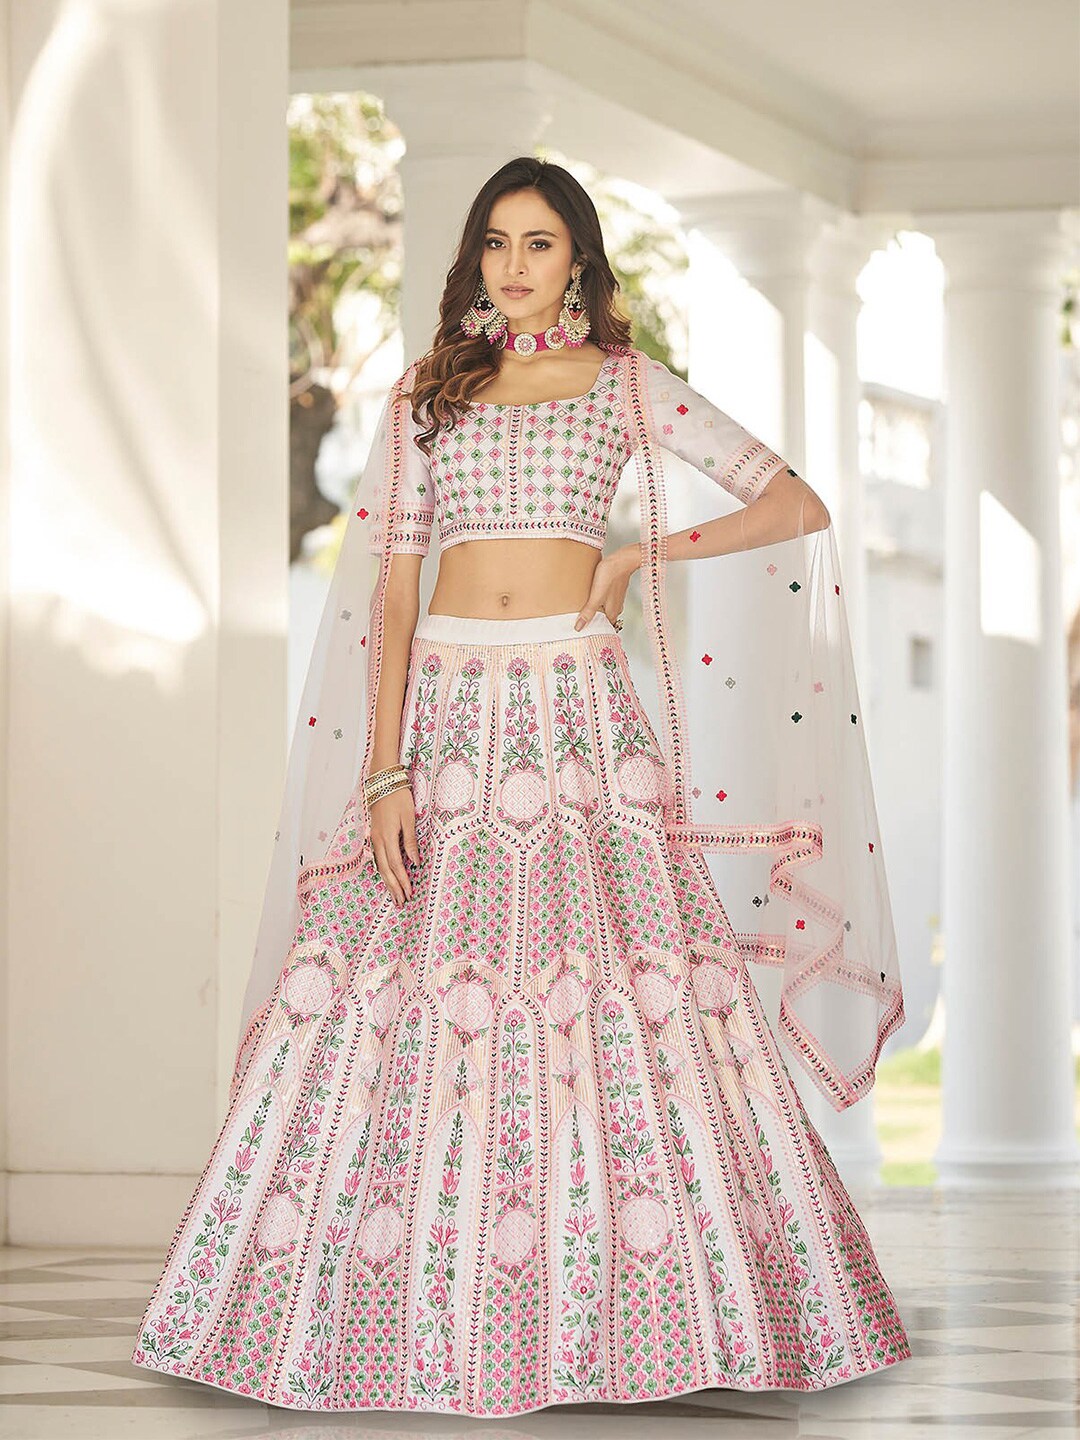 ODETTE White & Pink Printed Semi-Stitched Lehenga & Unstitched Blouse With Dupatta